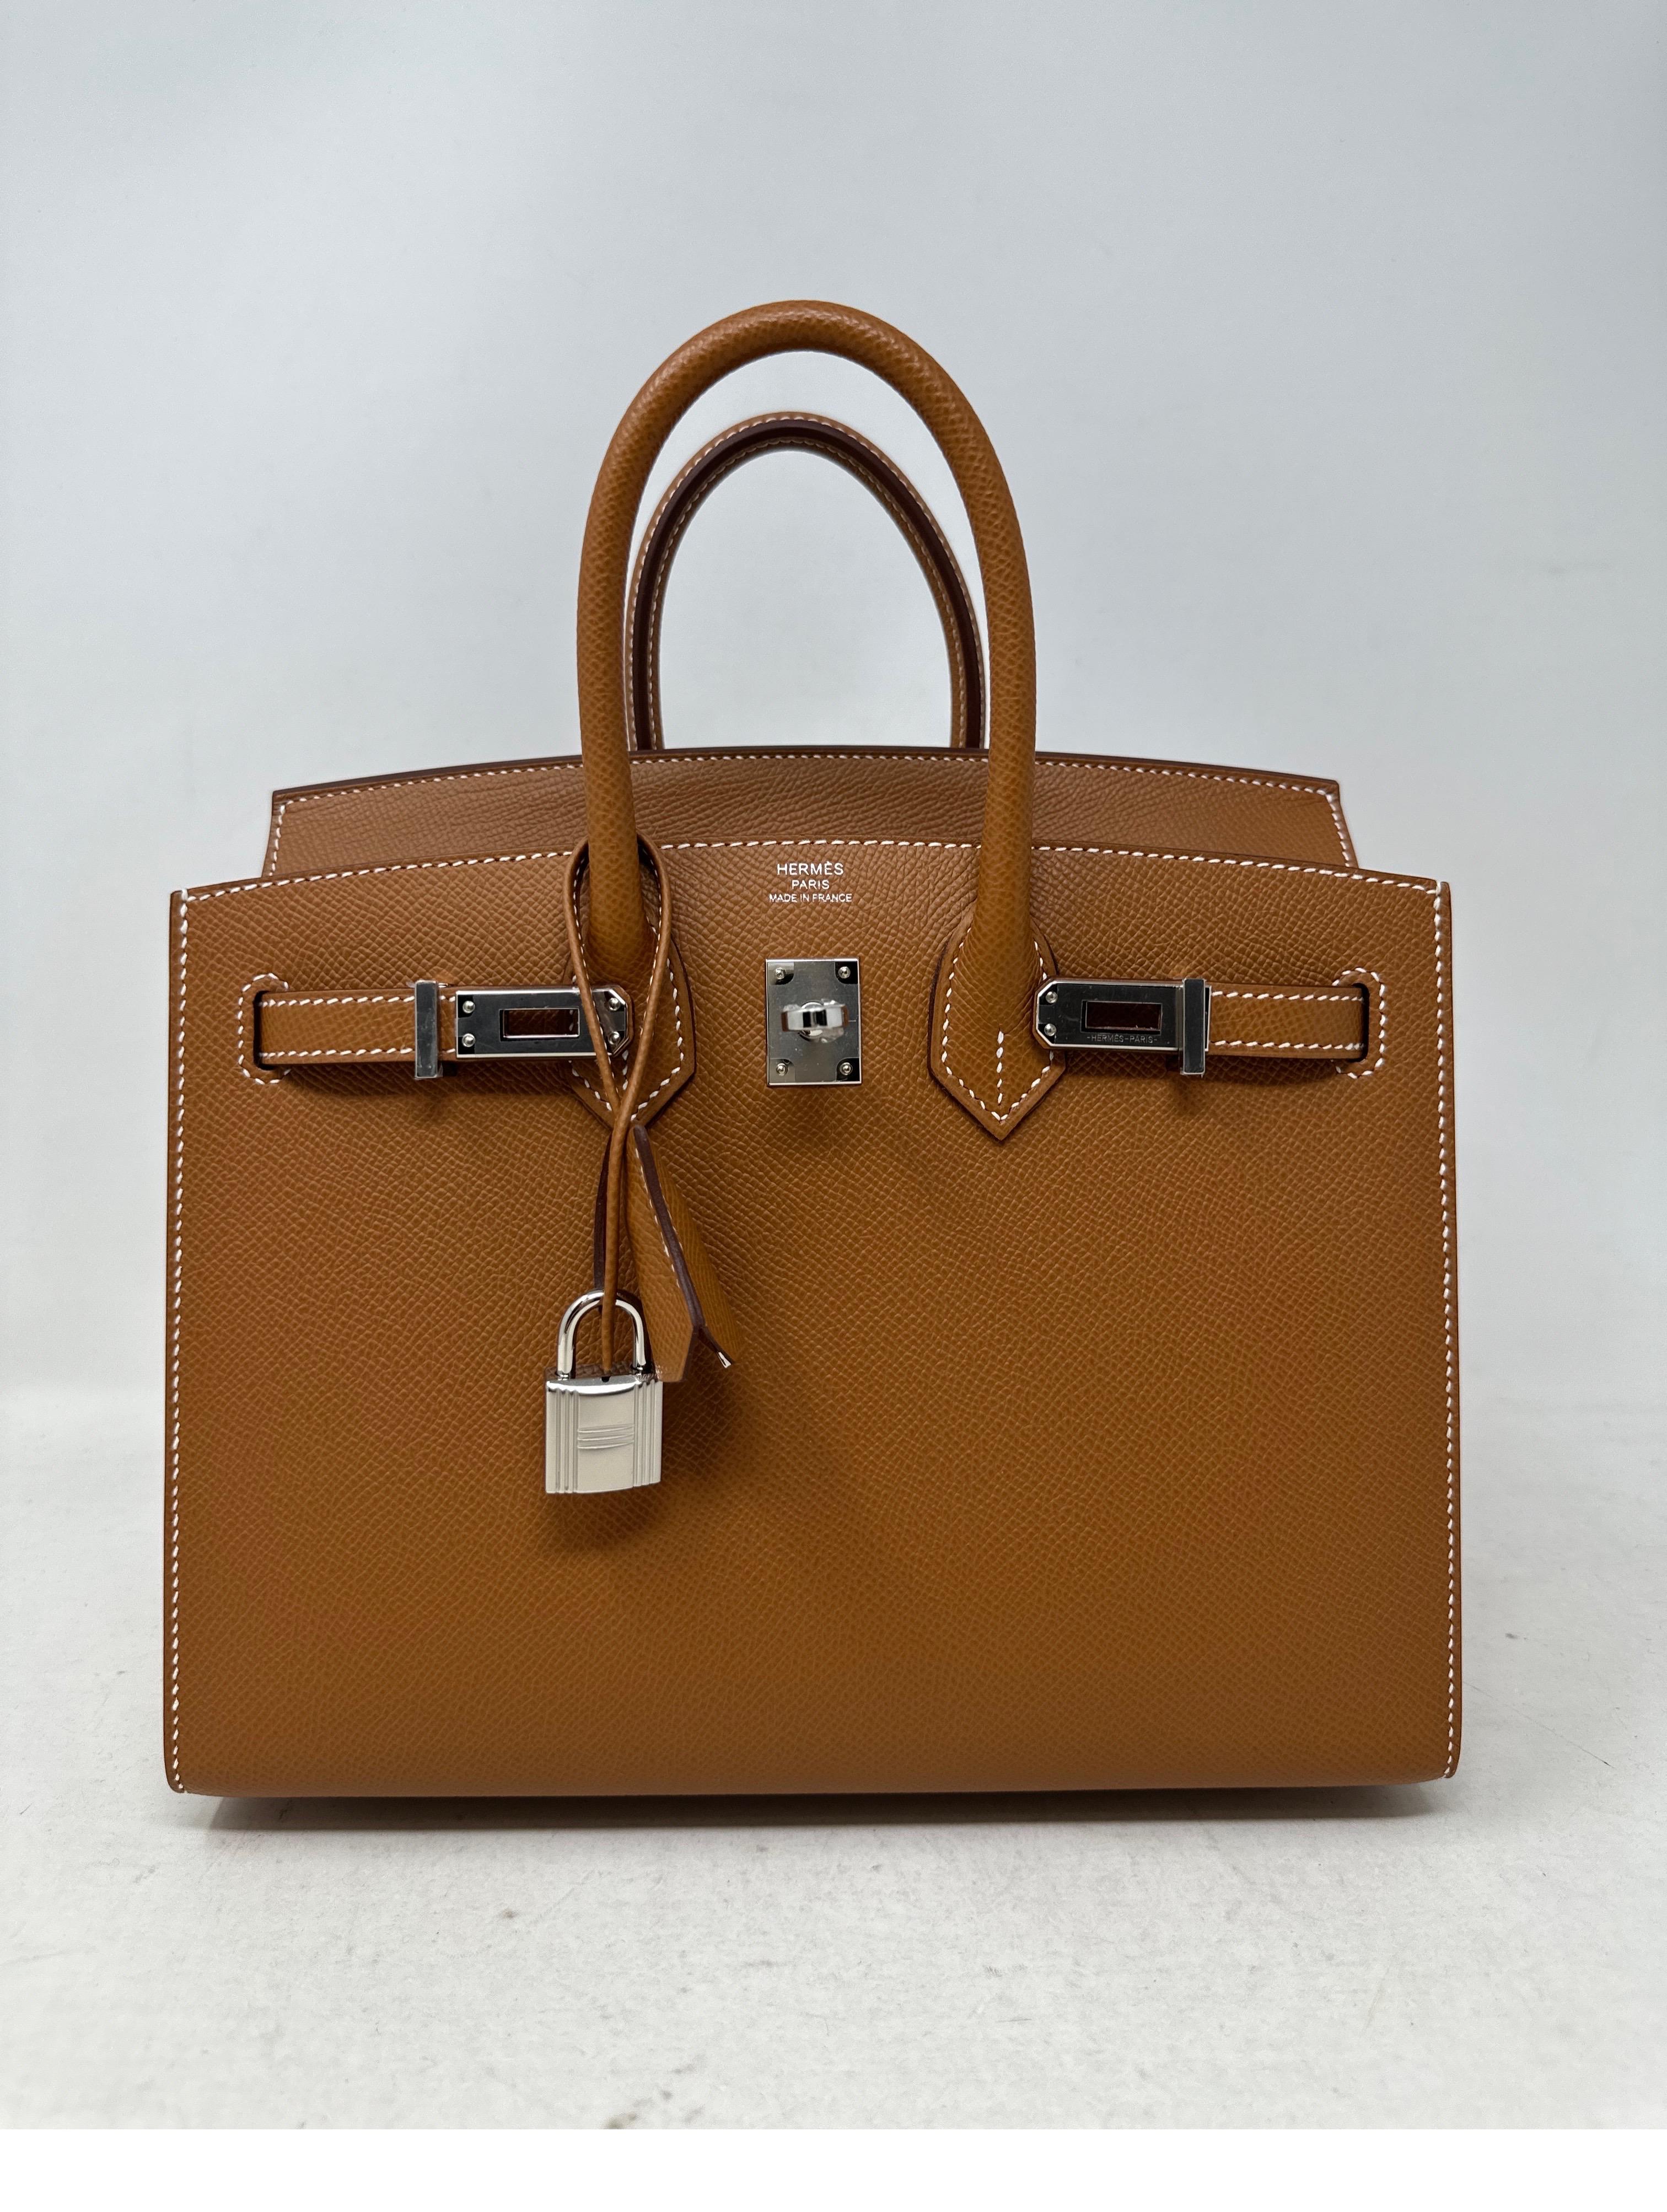 Hermes Gold Birkin 25 Bag. Brand new Birkin with palladium hardware. Gold tan color. Sellier Epsom leather. Rare size and most wanted color. Includes clochette, lock, keys, and dust bag. Guaranteed authentic. 